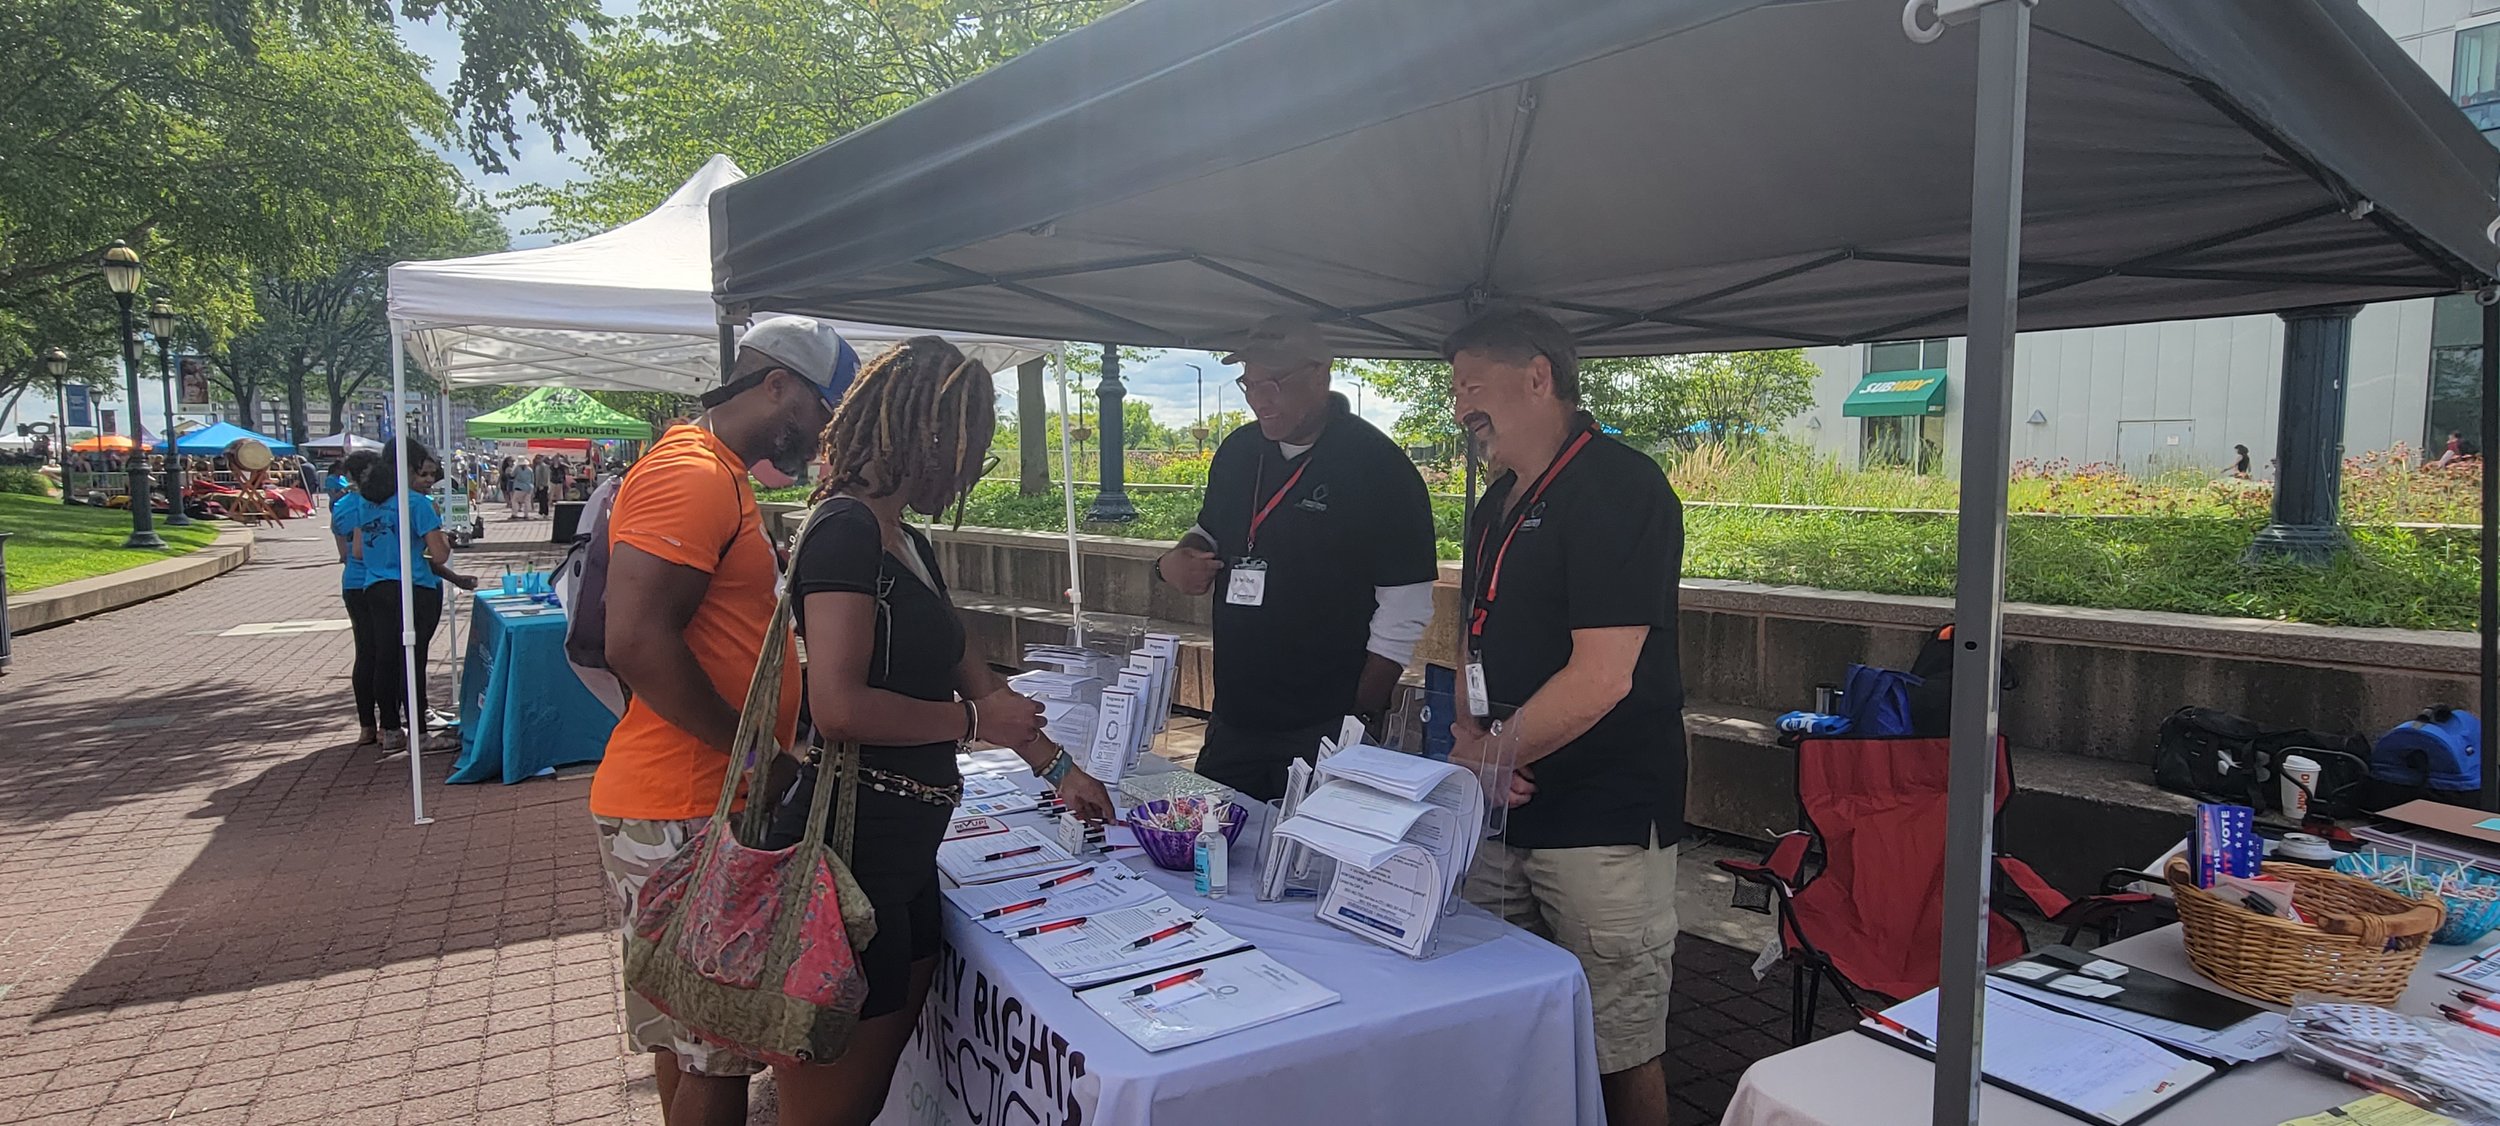  DRCT’s Strategic Partnerships Manager, Mike Whilby and Lead Investigator, Jim Welsh stand smiling under the DRCT black tent while talking to two event attendees at the DRCT resource table. 